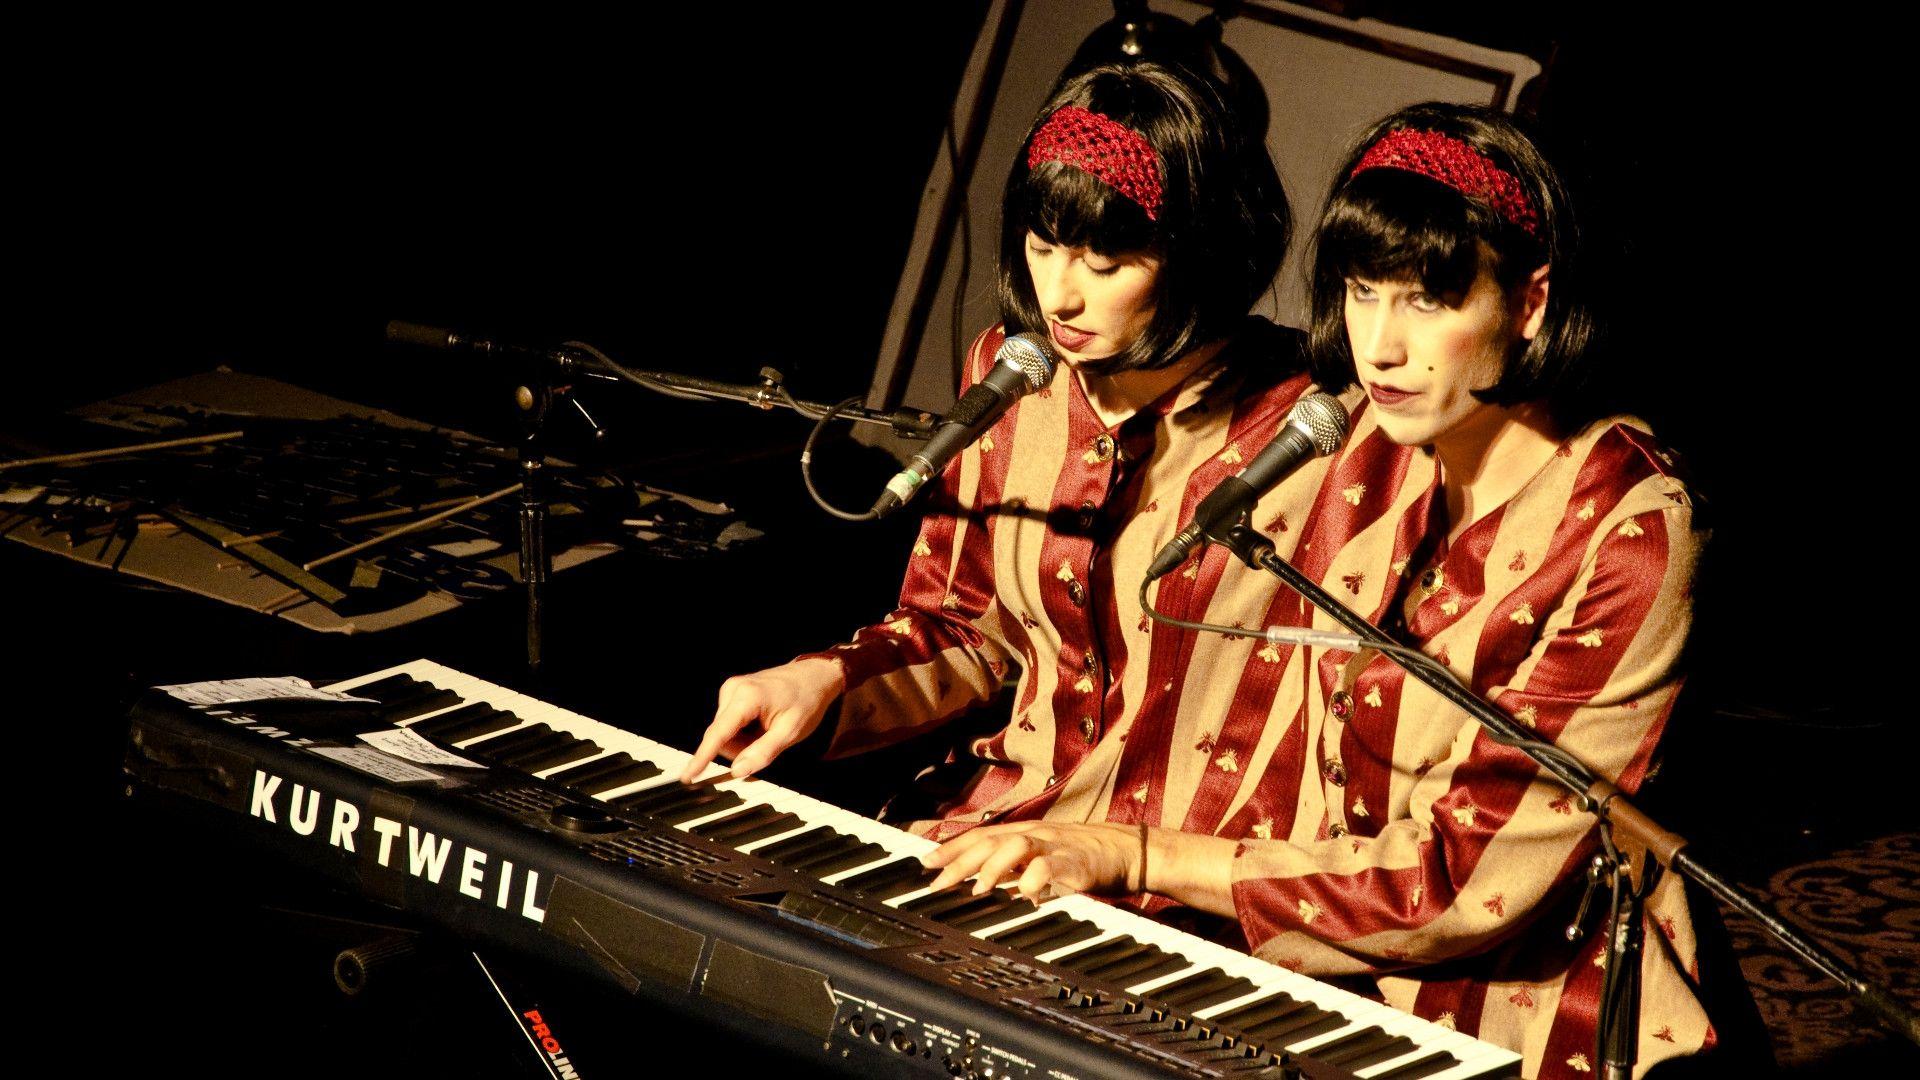 Download Wallpaper 1920x1080 evelyn evelyn, brunettes, synthesizer